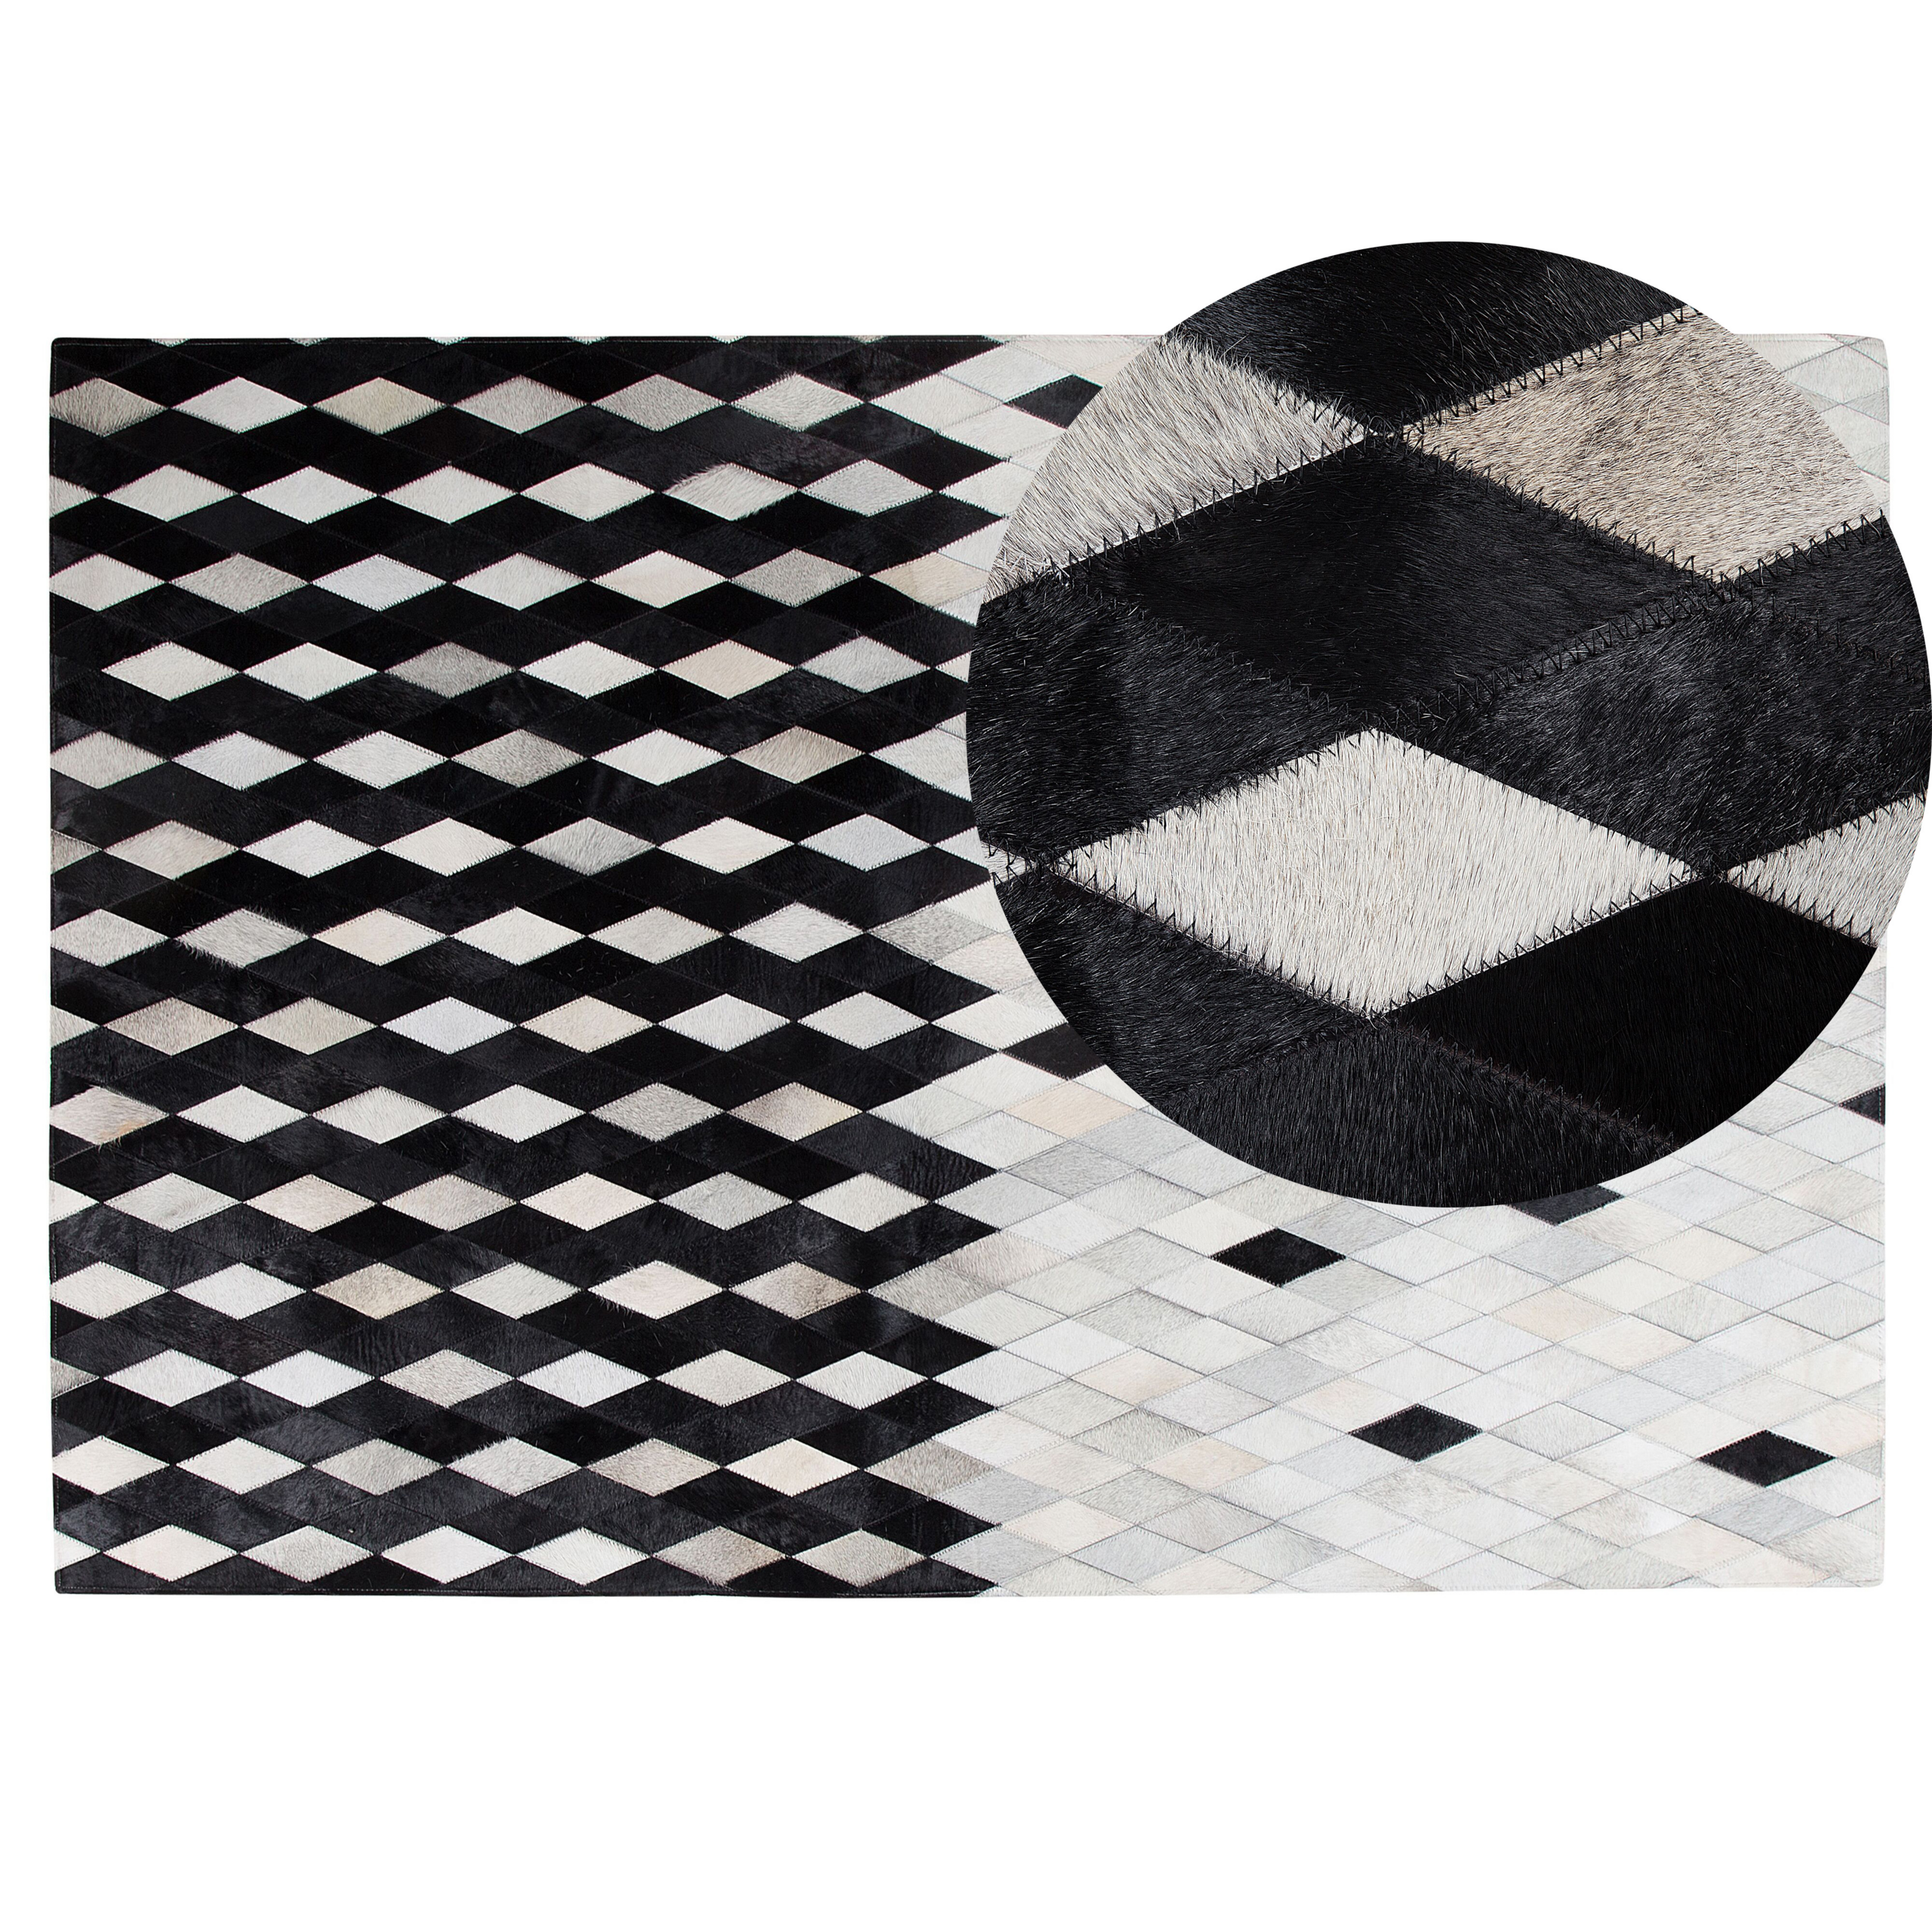 Beliani Rug Black and White Leather 140 x 200 cm Modern Patchwork Handcrafted